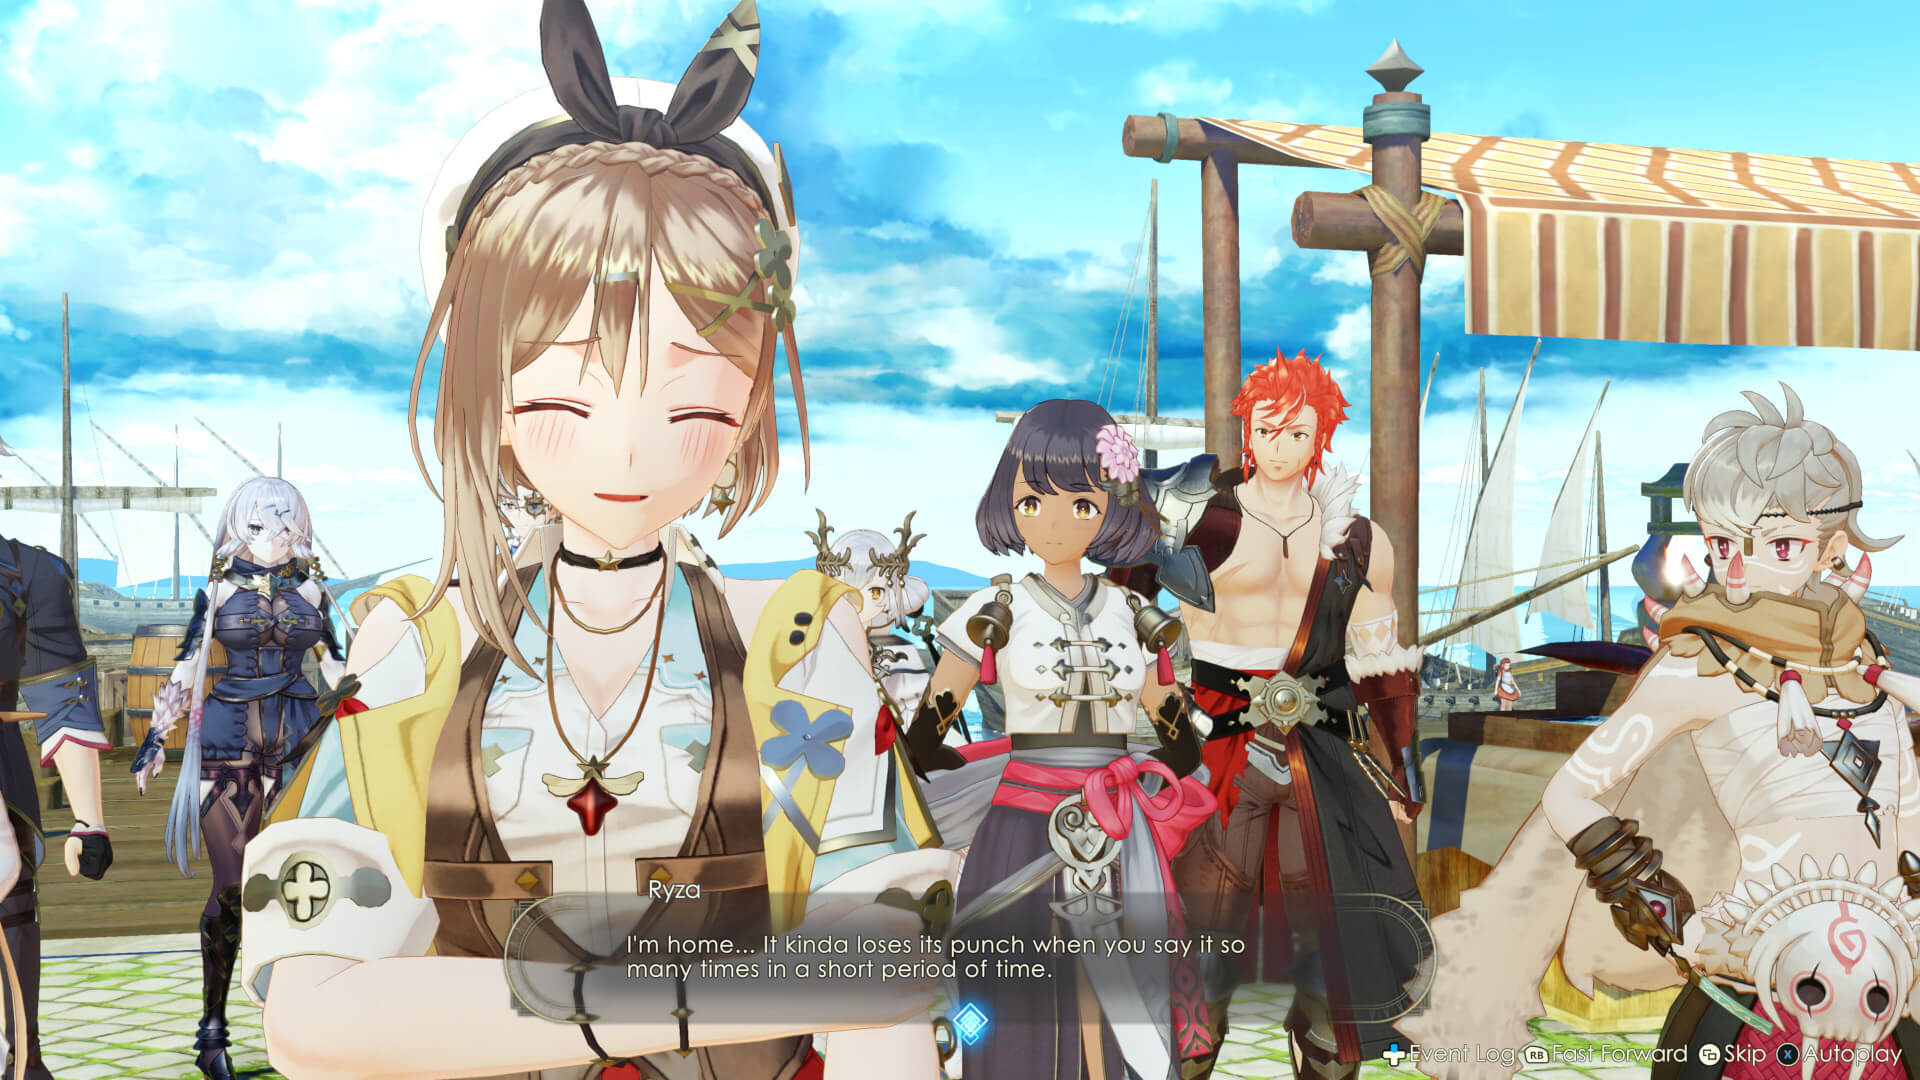 Ryza saying "I'm home...It kinda loses its punch when you say it so many times in a short period of time." in Atelier Ryza 3